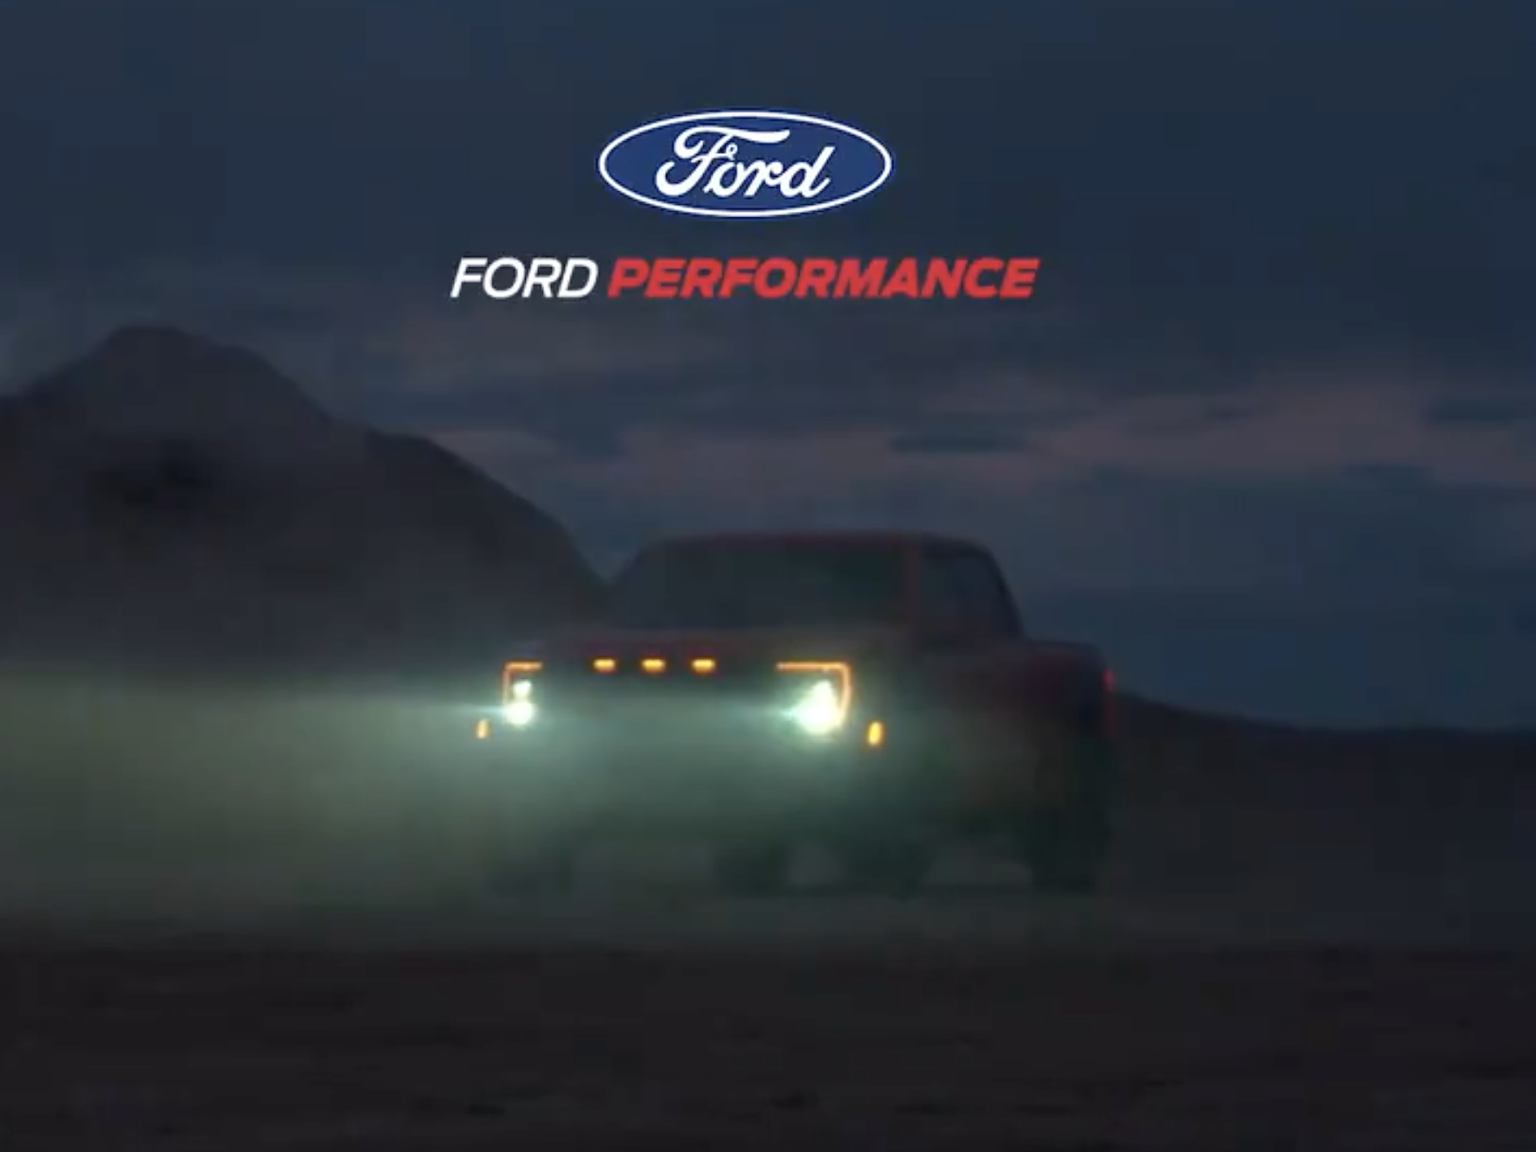 Ford has redesigned the F-150 Raptor for the 2022 model year.